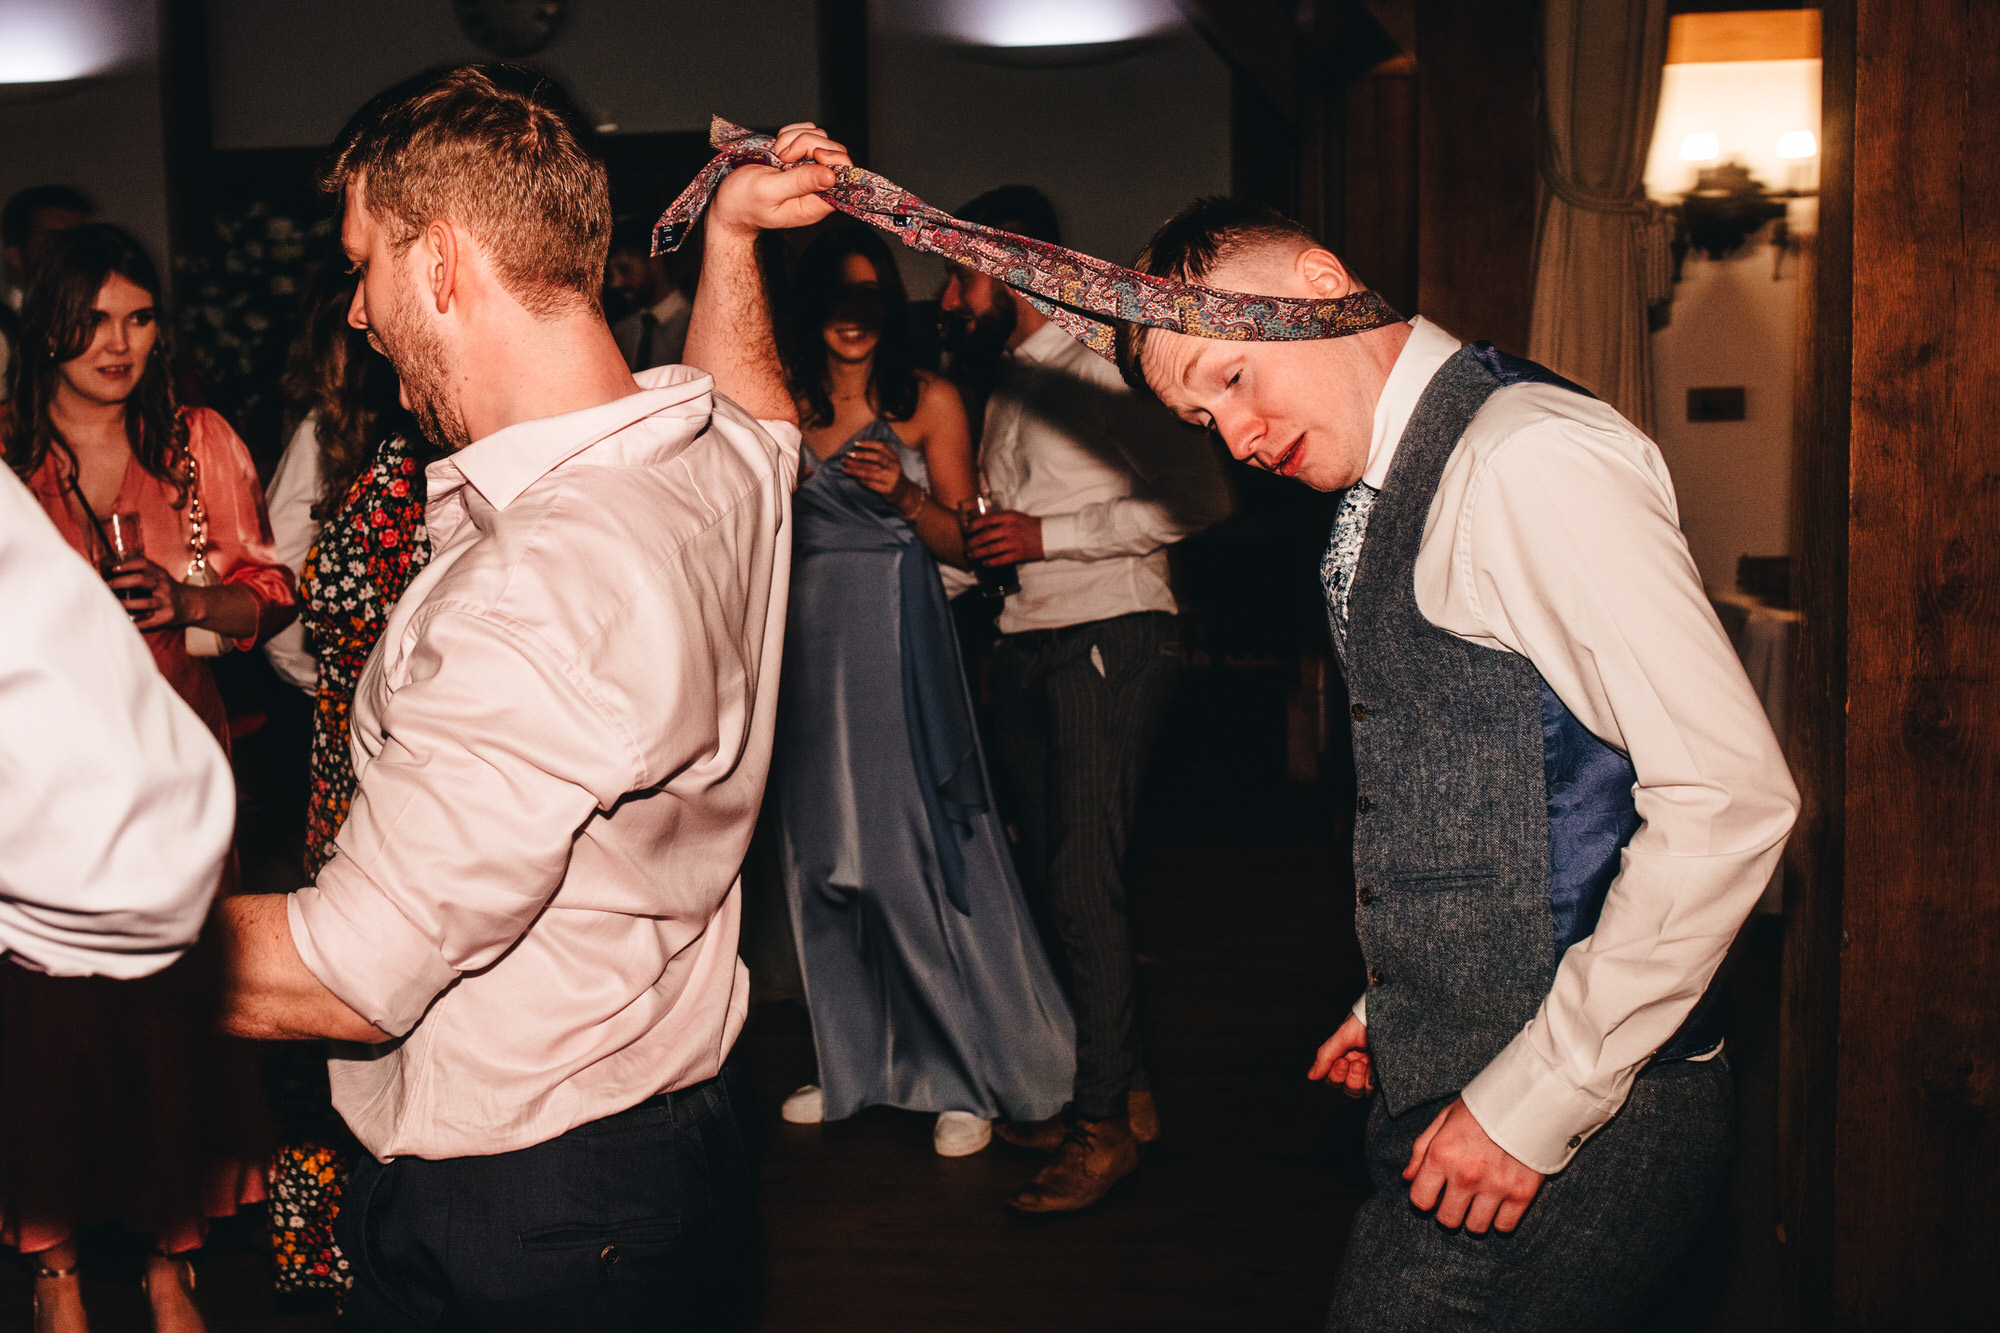 man leads another guest by his tie around his head onto the dancefloor